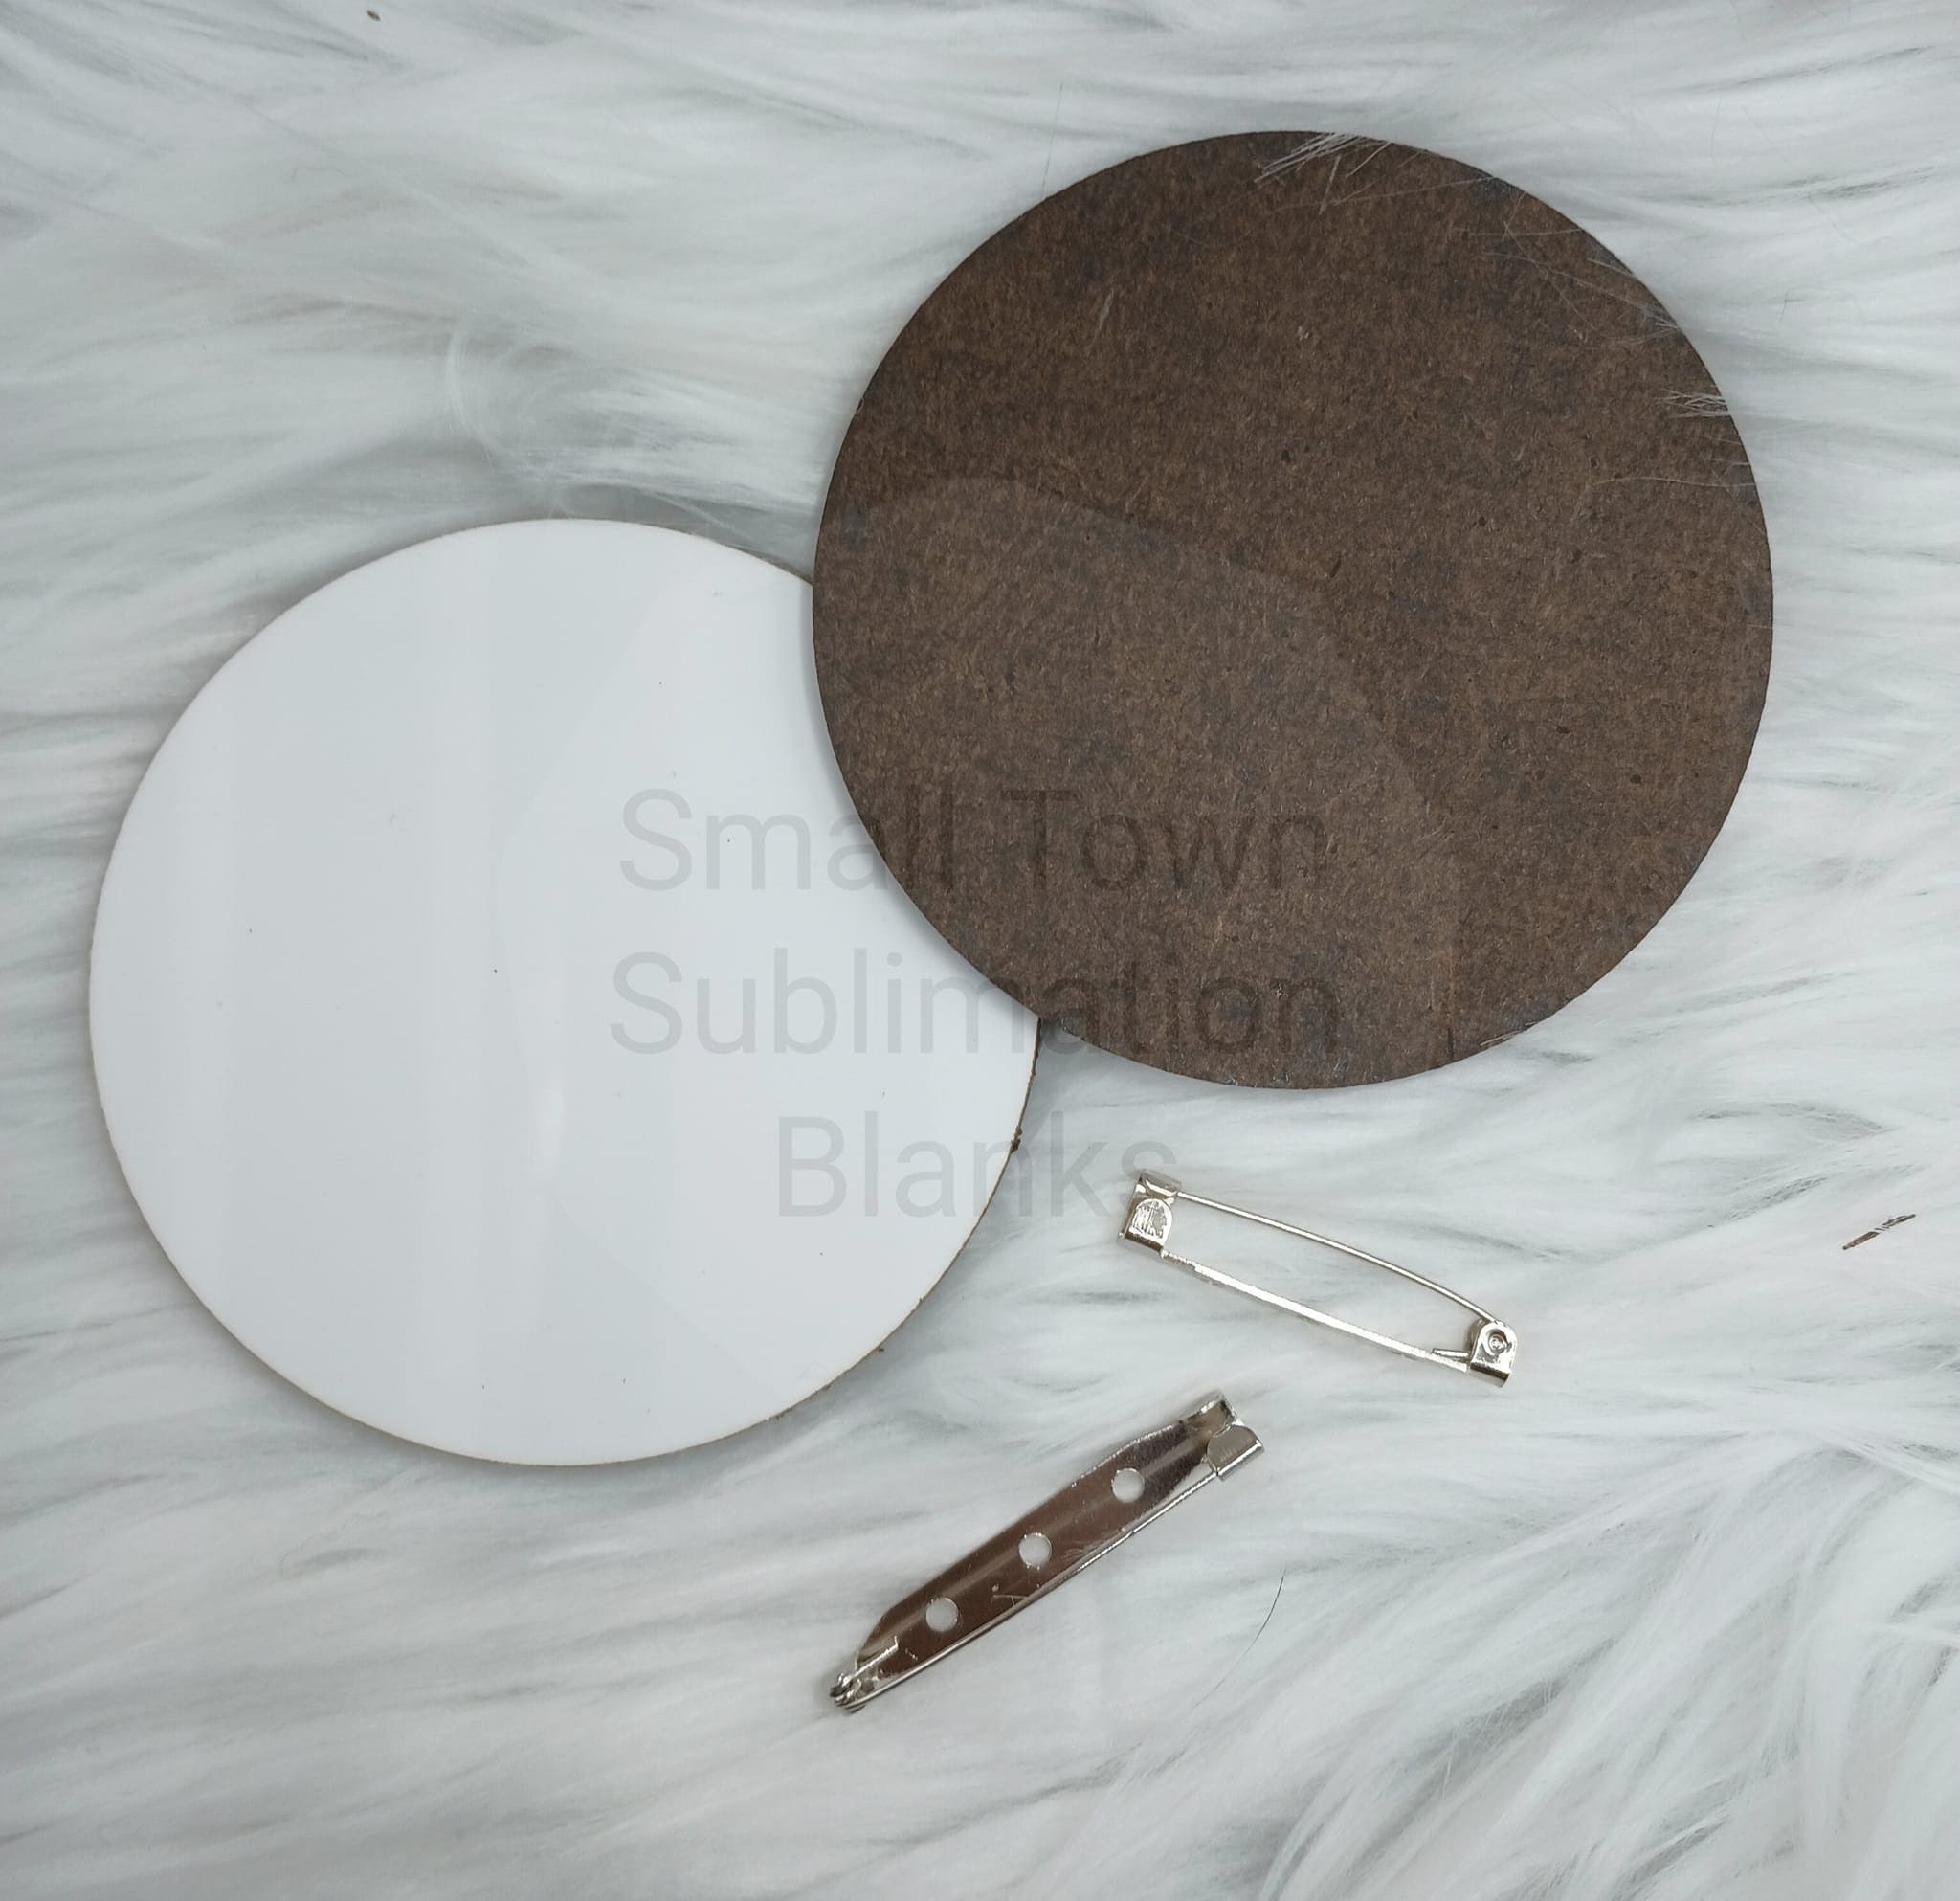 Round Sublimation Blank Buttons, Picture Buttons, Large 3 Inch Round,  Unisub, Laser Cut in USA, Pin Backing 